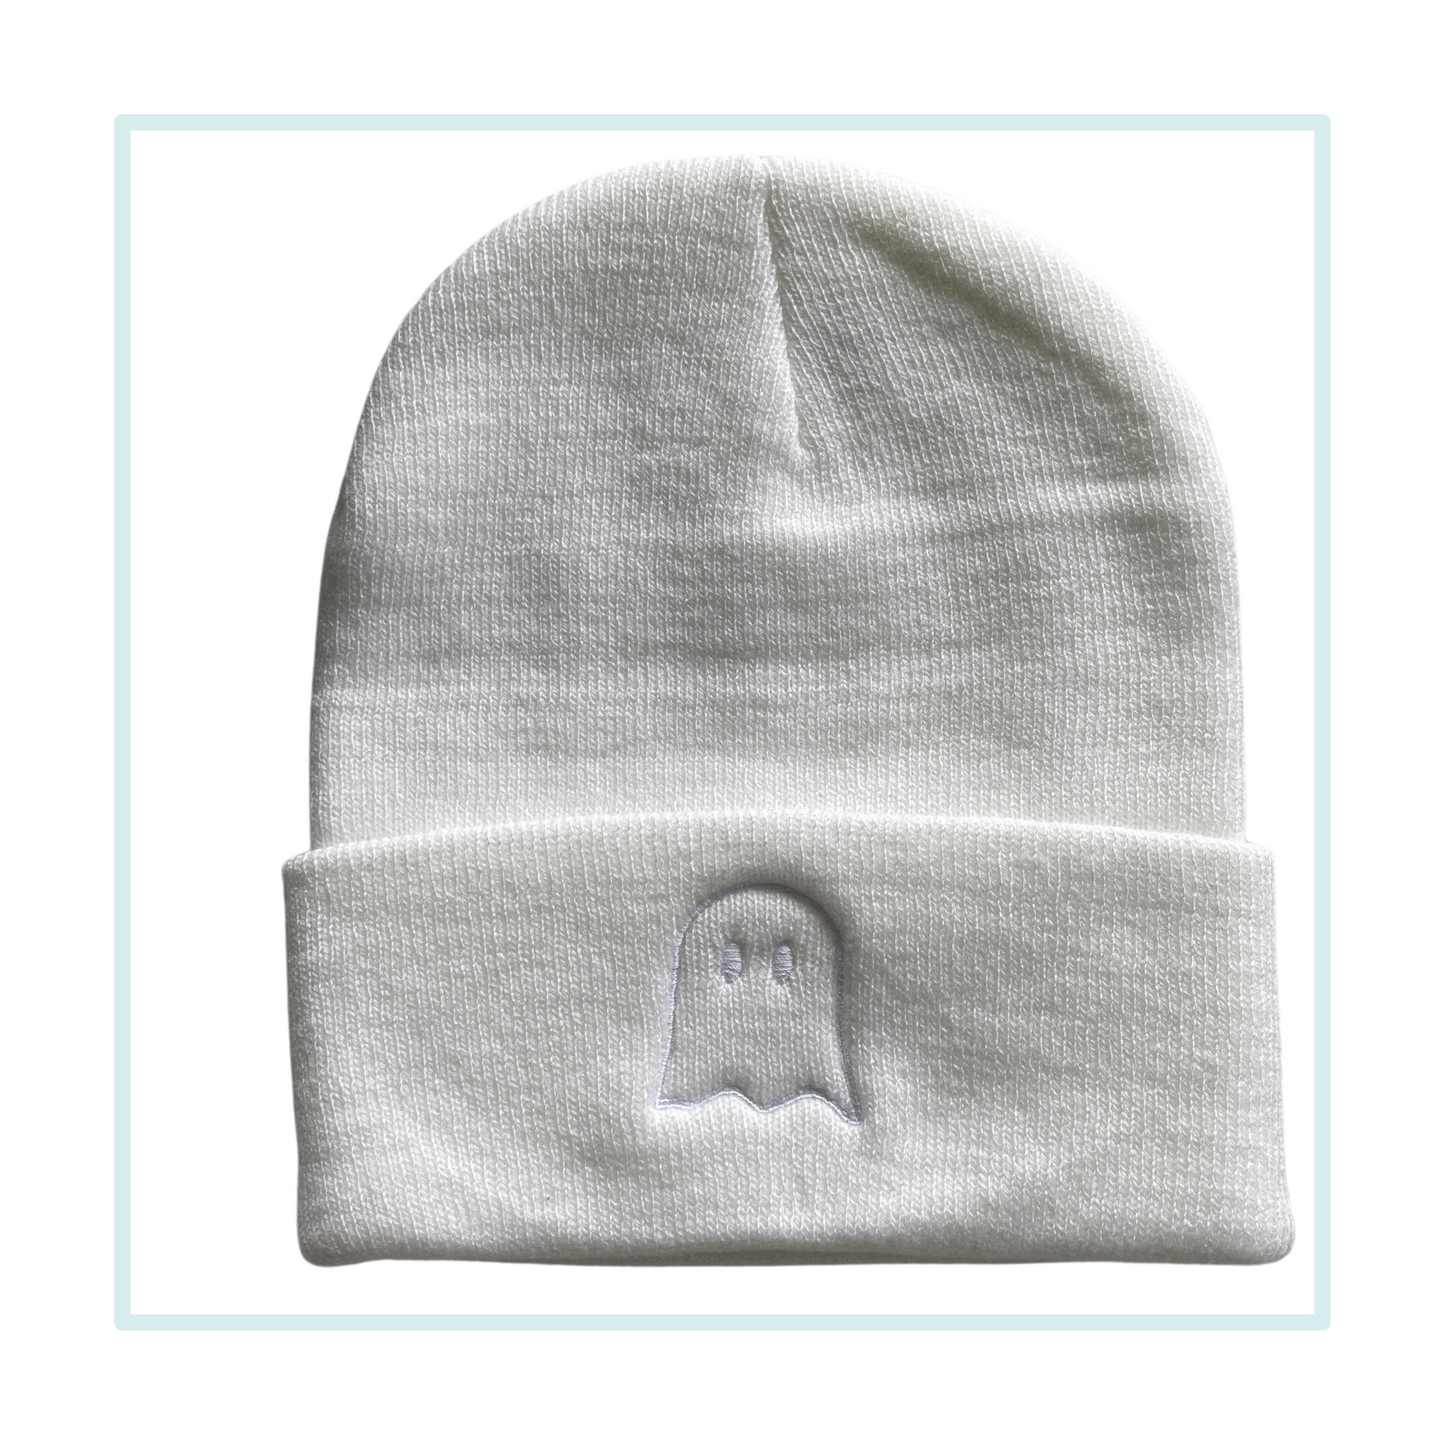 Ghosted Beanie